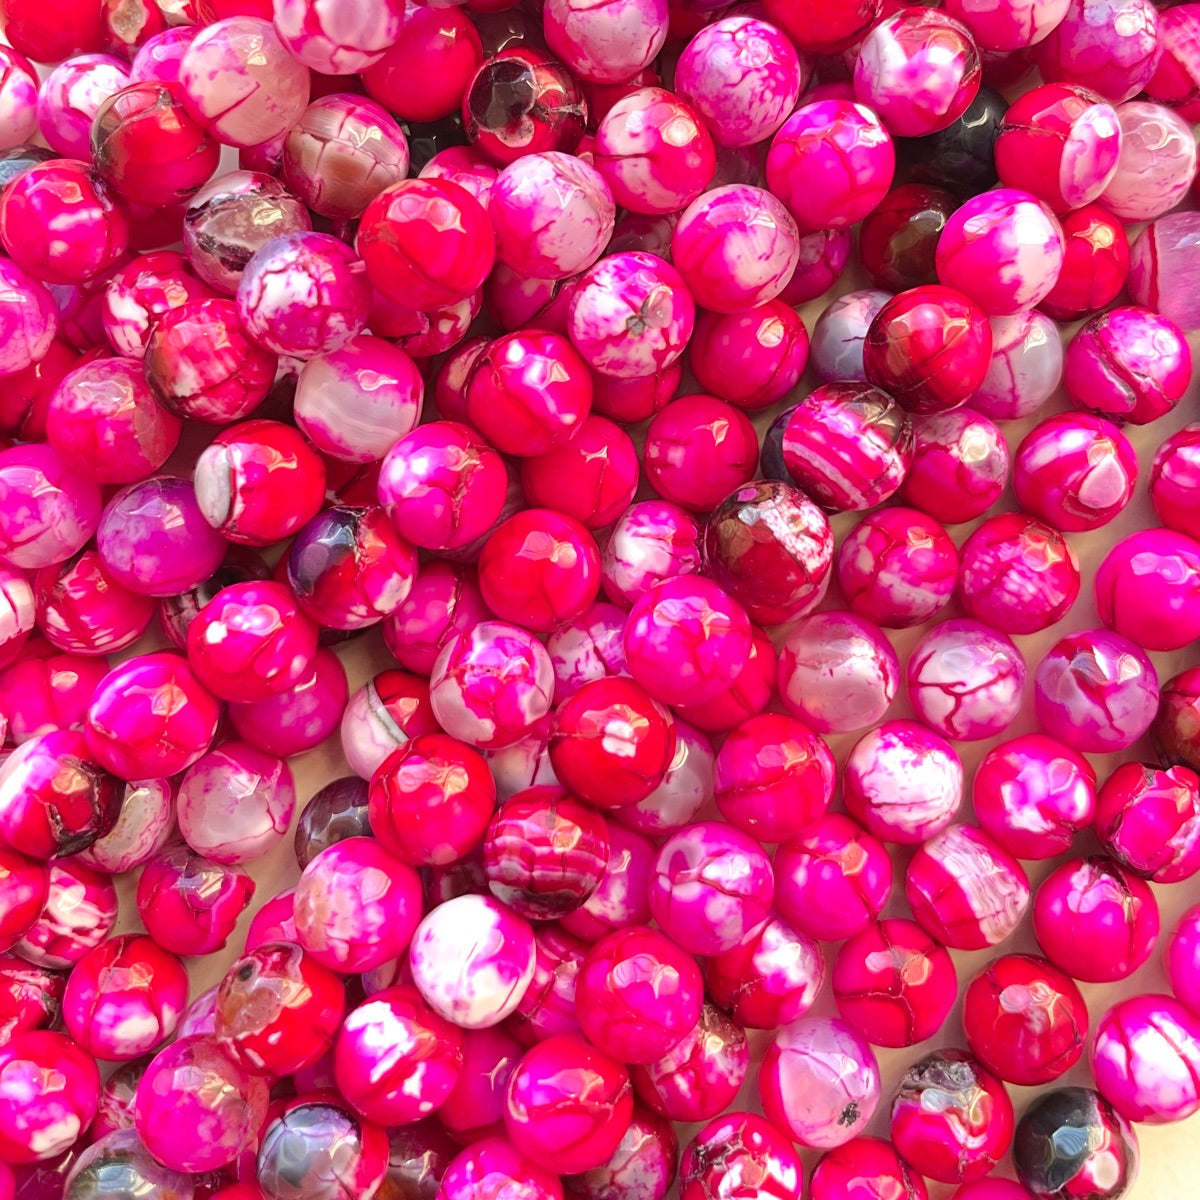 2 Strands/lot 8mm Colorful Cracked Fire Agate Faceted Stone Beads Hot Pink Stone Beads 8mm Stone Beads Faceted Agate Beads New Beads Arrivals Charms Beads Beyond